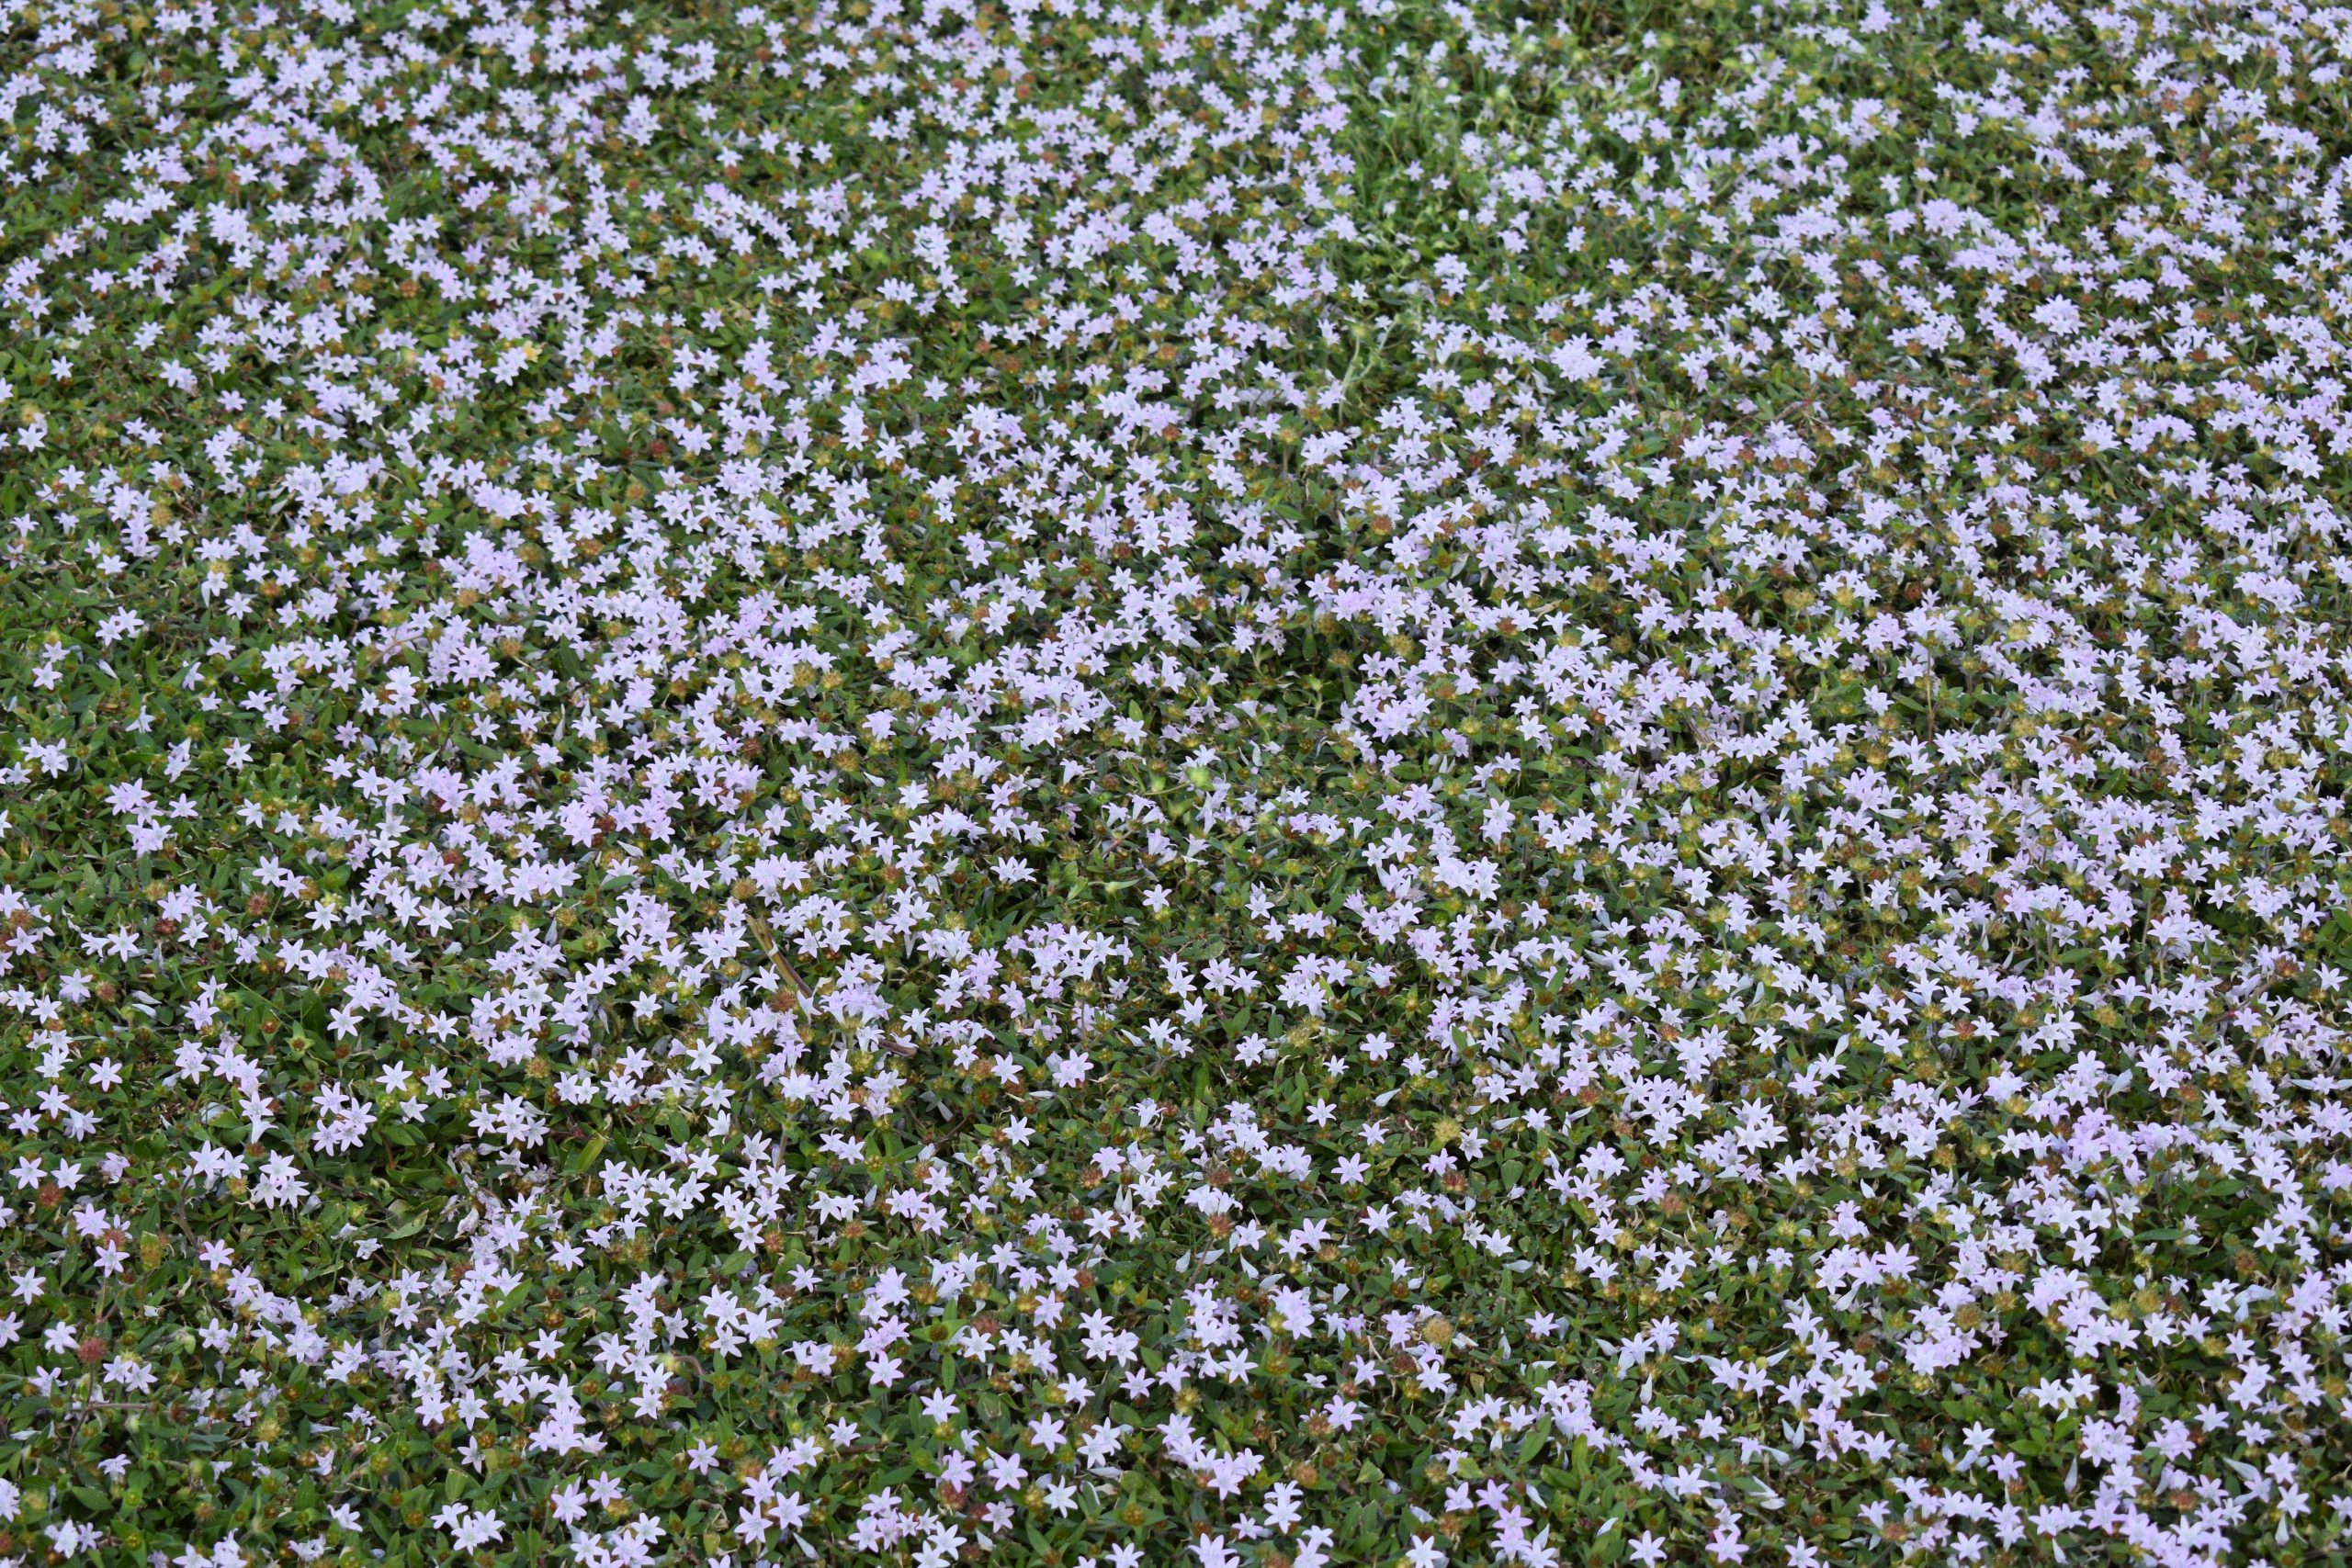 Patch of lawn